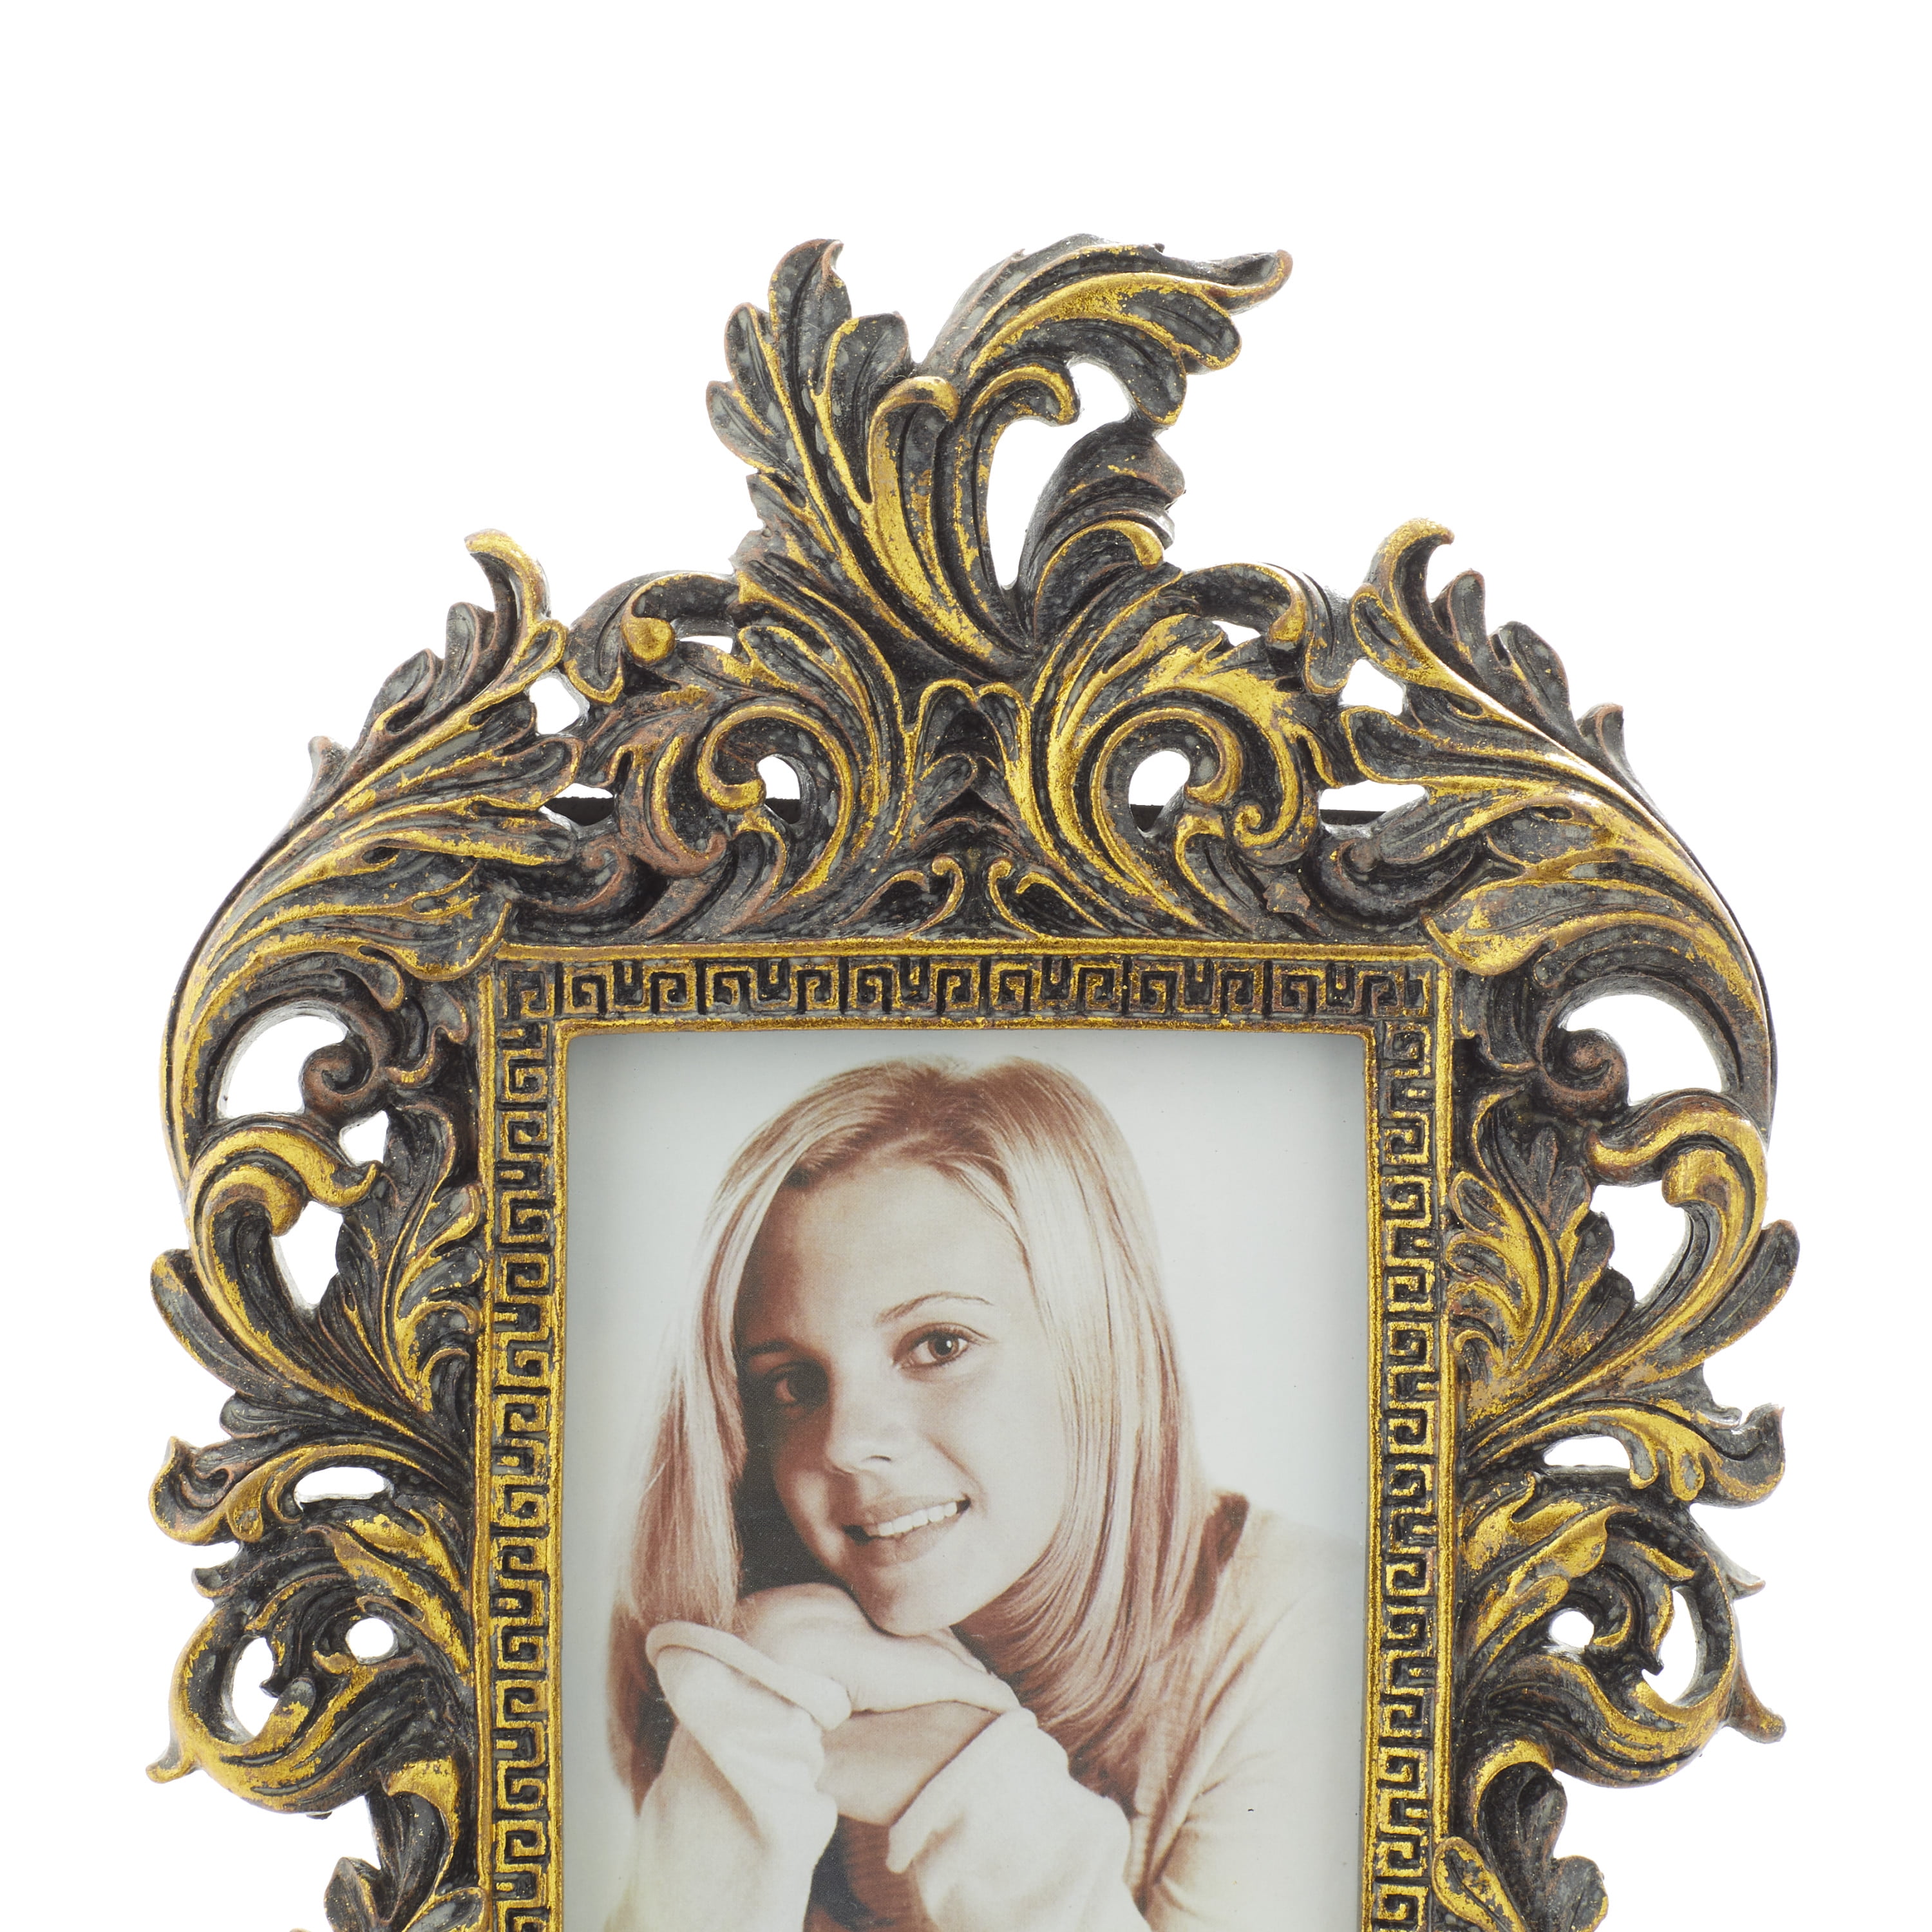 Harper & Willow 4 in. x 6 in. Polystone Traditional Photo Frame Set, 9 in.  x 11 in., White, 2 pc. at Tractor Supply Co.